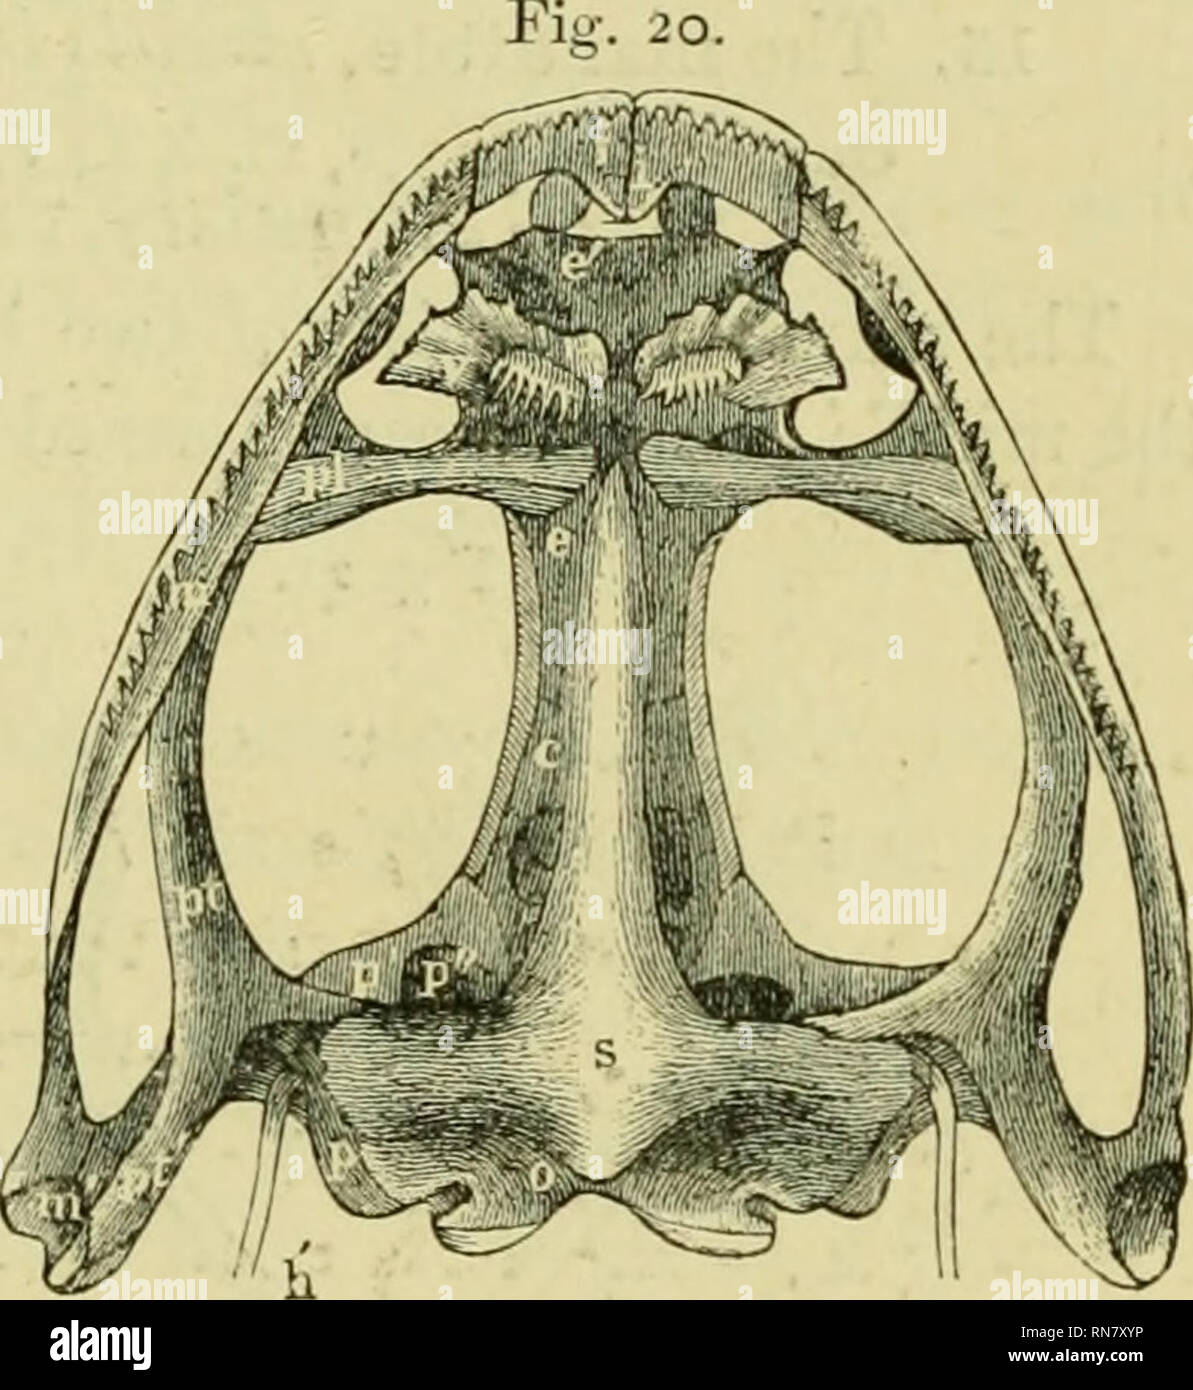 . The anatomy of the frog. Frogs -- Anatomy; Amphibians -- Anatomy. THE SKULL. 33 / cover of the processus frontalis, connects the hindermost transverse portion of the nasal cartilage with the cartilage which runs forwards from the suspensorium upon the anterior arm of the pterygoid. 11. The nasal bones, ossa fronto-nasalia, Dugcs (Figs, i o, i jfn). CvLvier, frontale anteriiis, I. r.,h.—Dugès, n. 2.—Meckel, nasal bone.— —Parker and Bettany, I. c, nasal bones. These flat^ triangular bones, which rest upon the nasal cartilages [ti), assist to bound the orbital cavities in fi'ont, and are connec Stock Photo